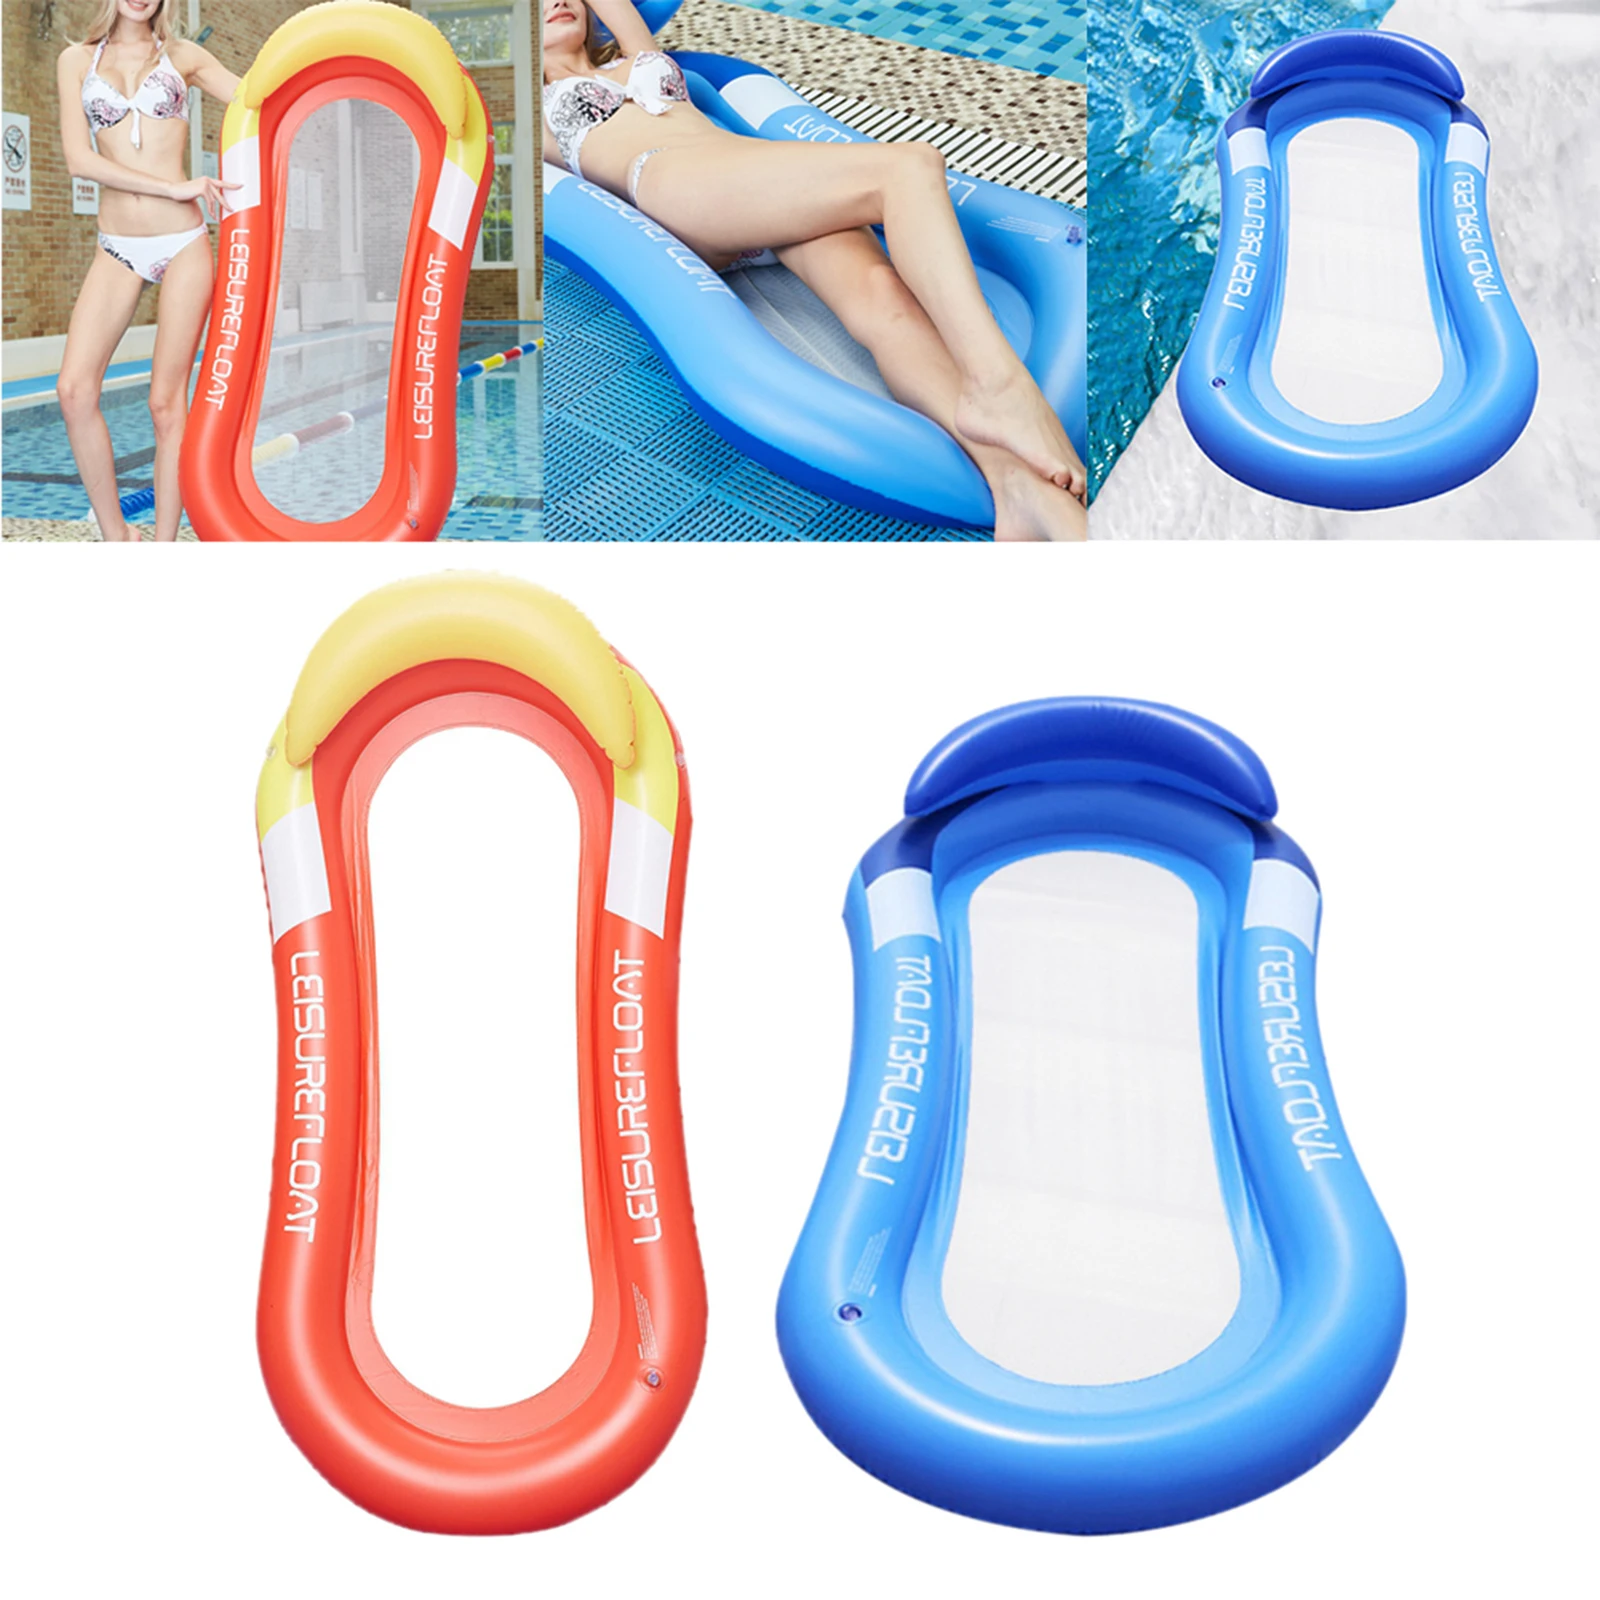 Pool Float Bed Mesh Floating Water Mat Lounger Lilo Air Bed Mattress 